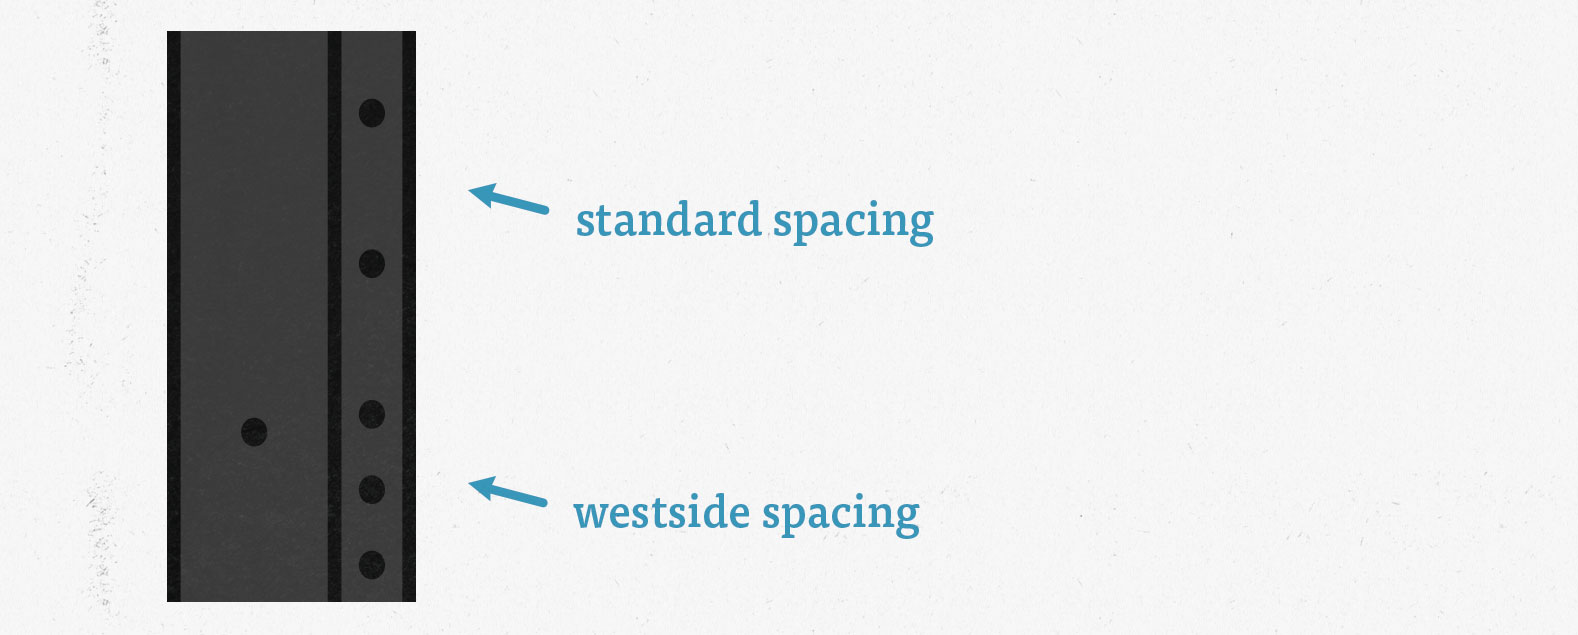 What's westside hole spacing and what's it for? Should you get a rack with westside hole spacing?